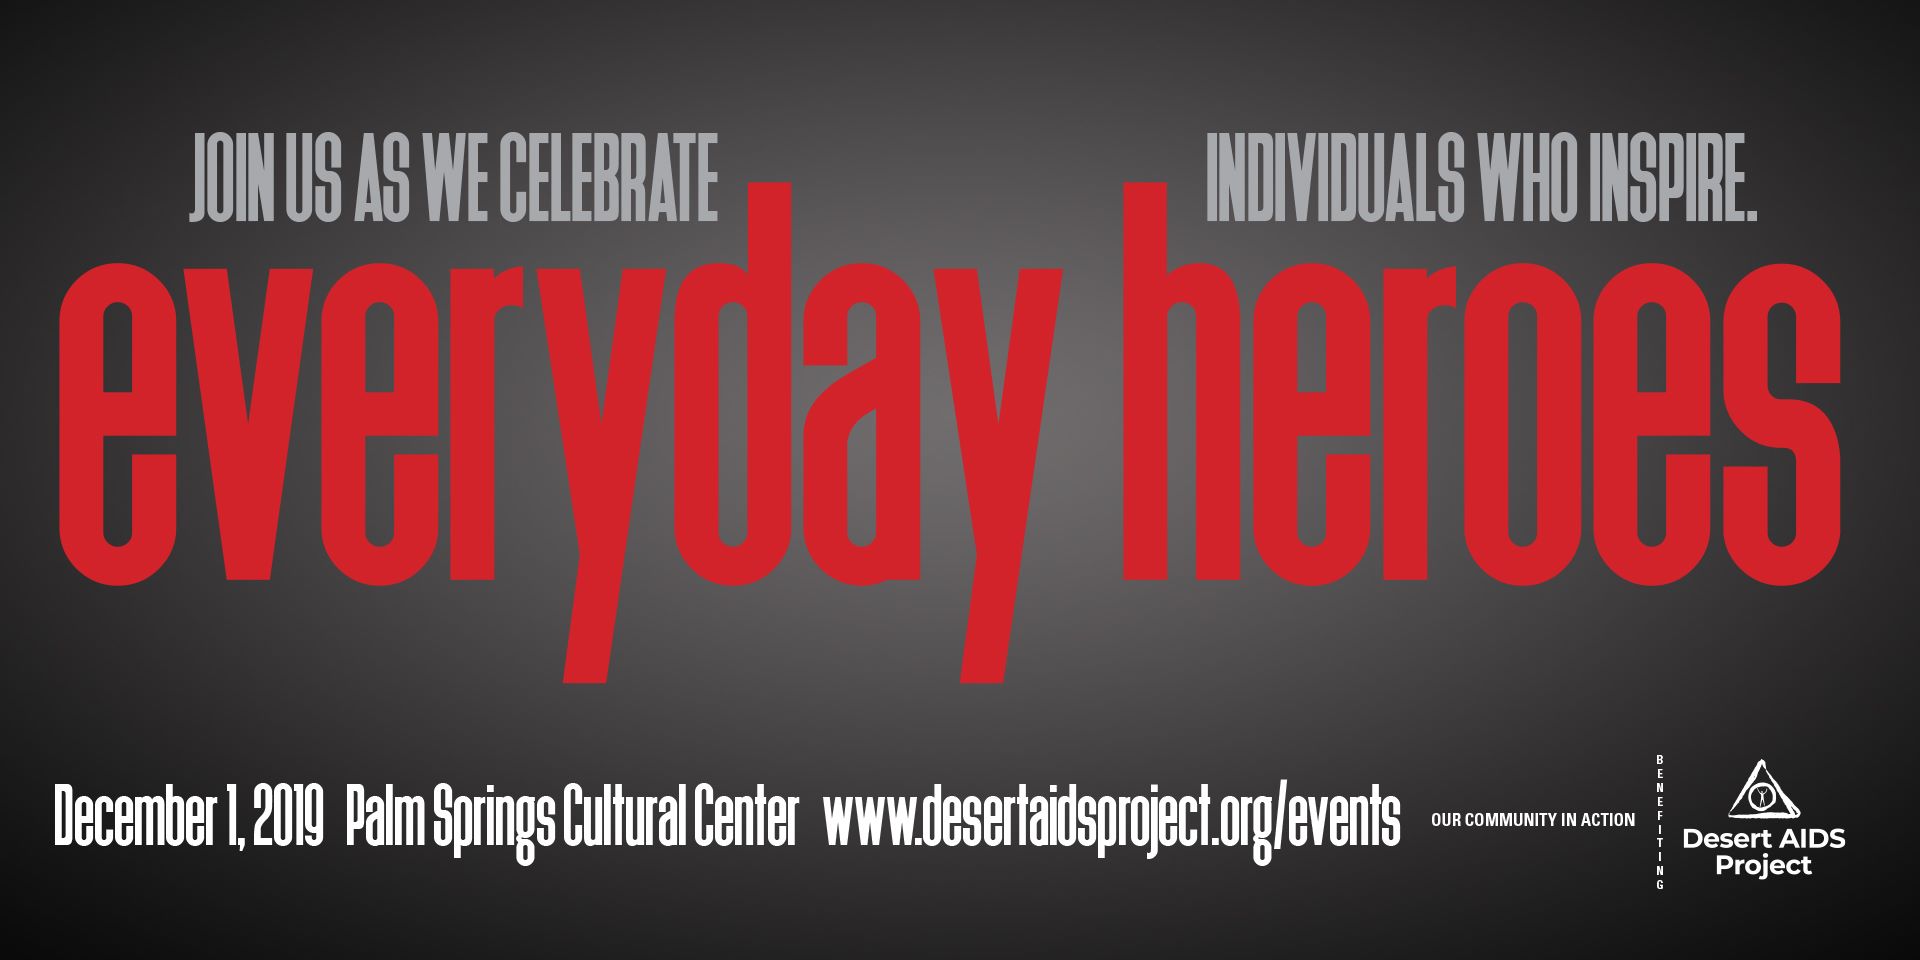 Everyday Heroes Honors Individuals Who I …